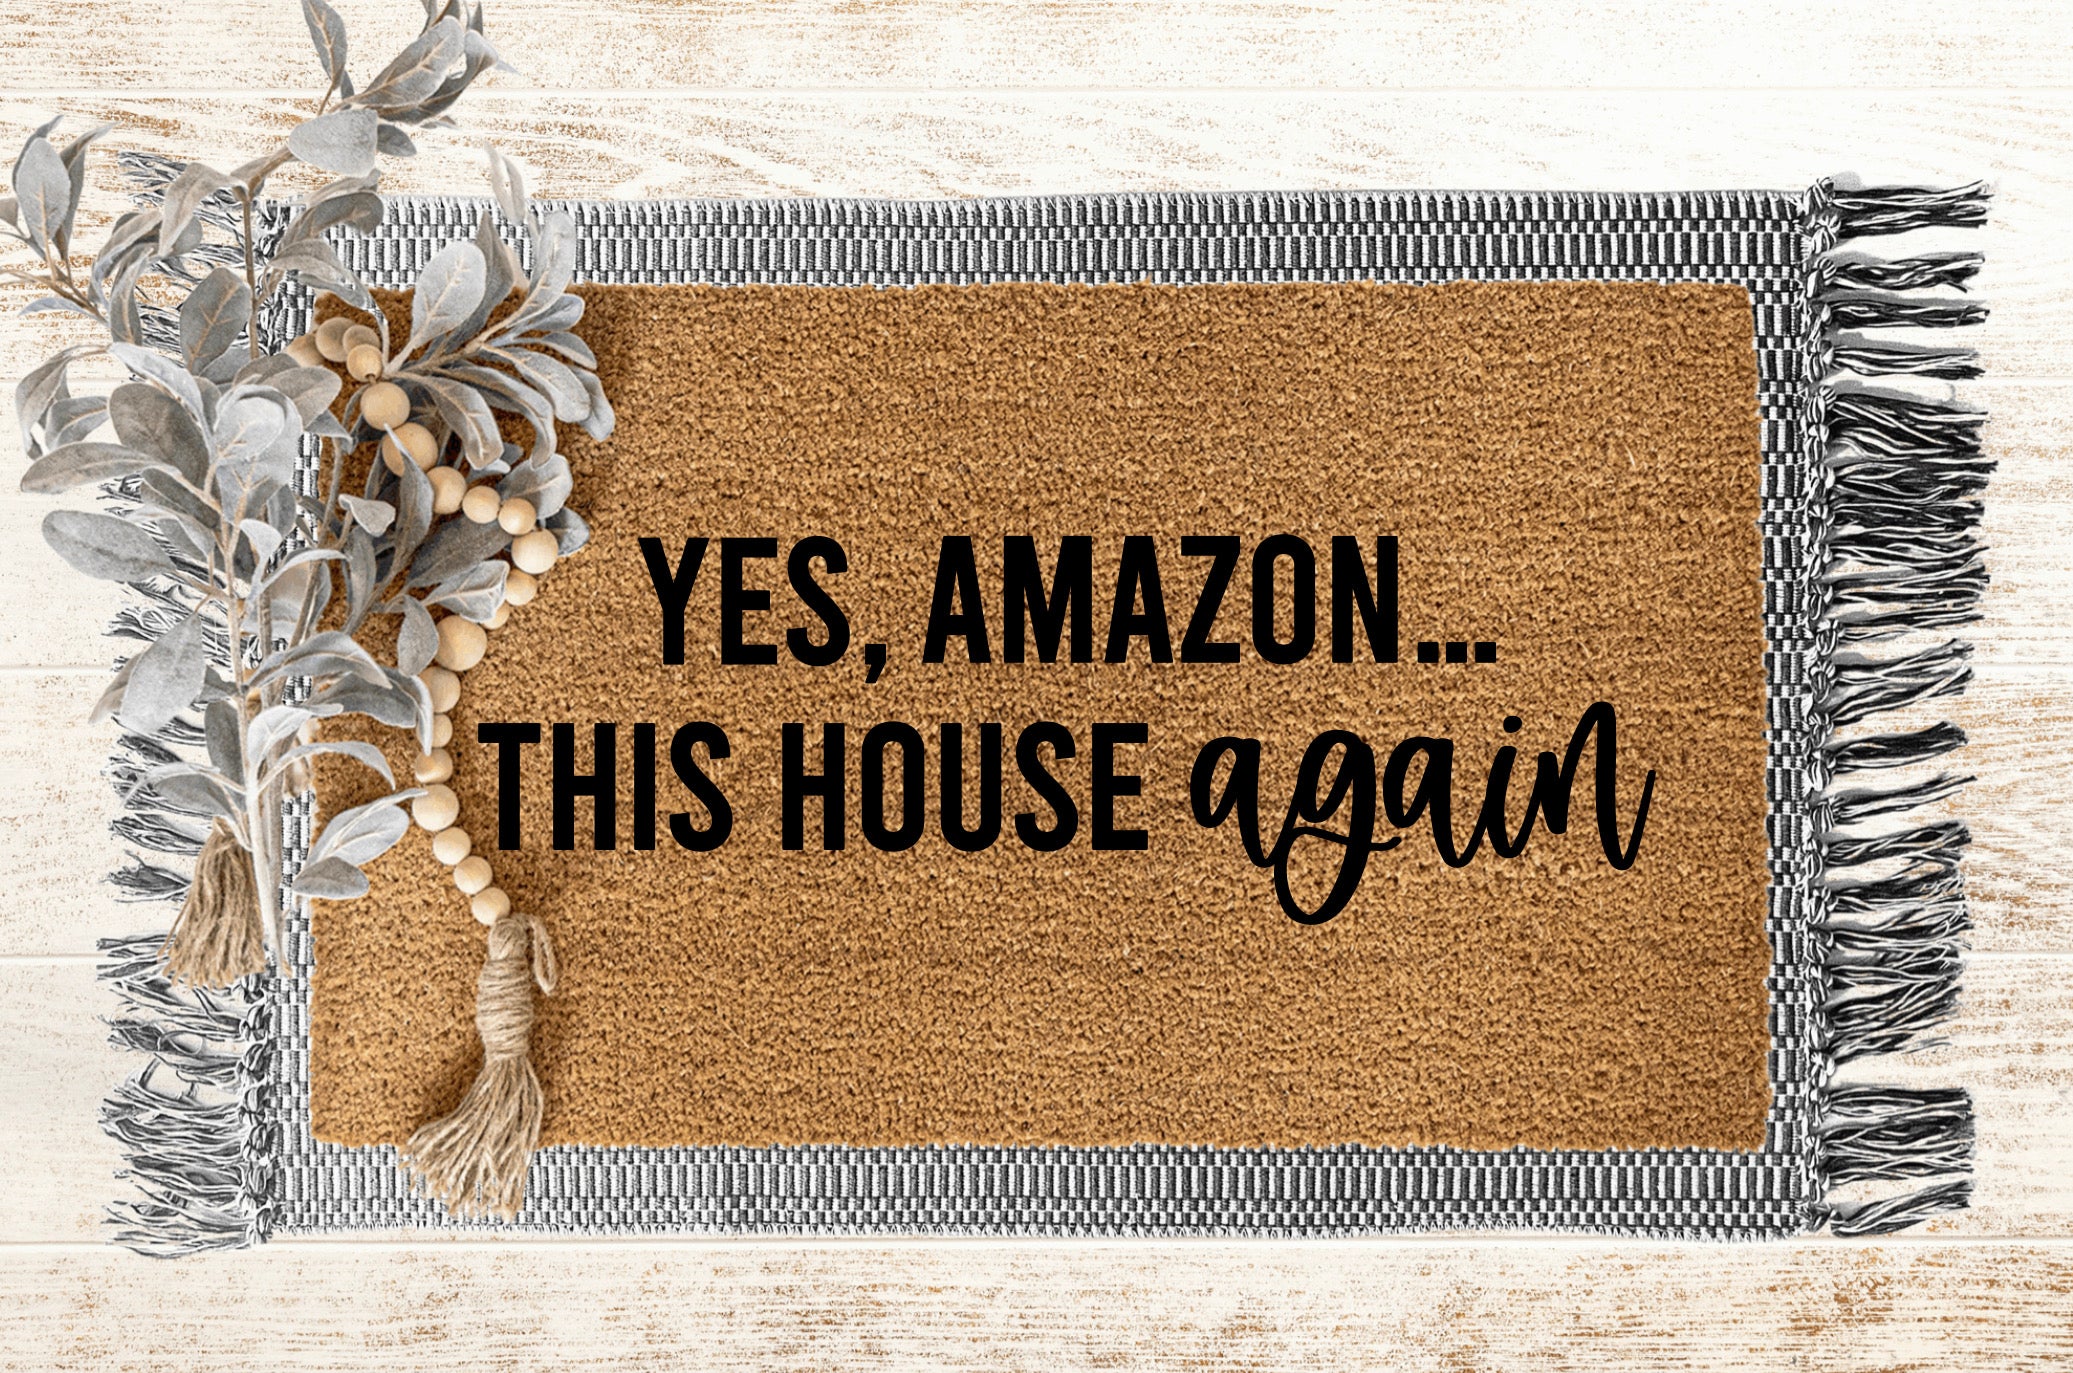 Yes, Amazon... This House Again